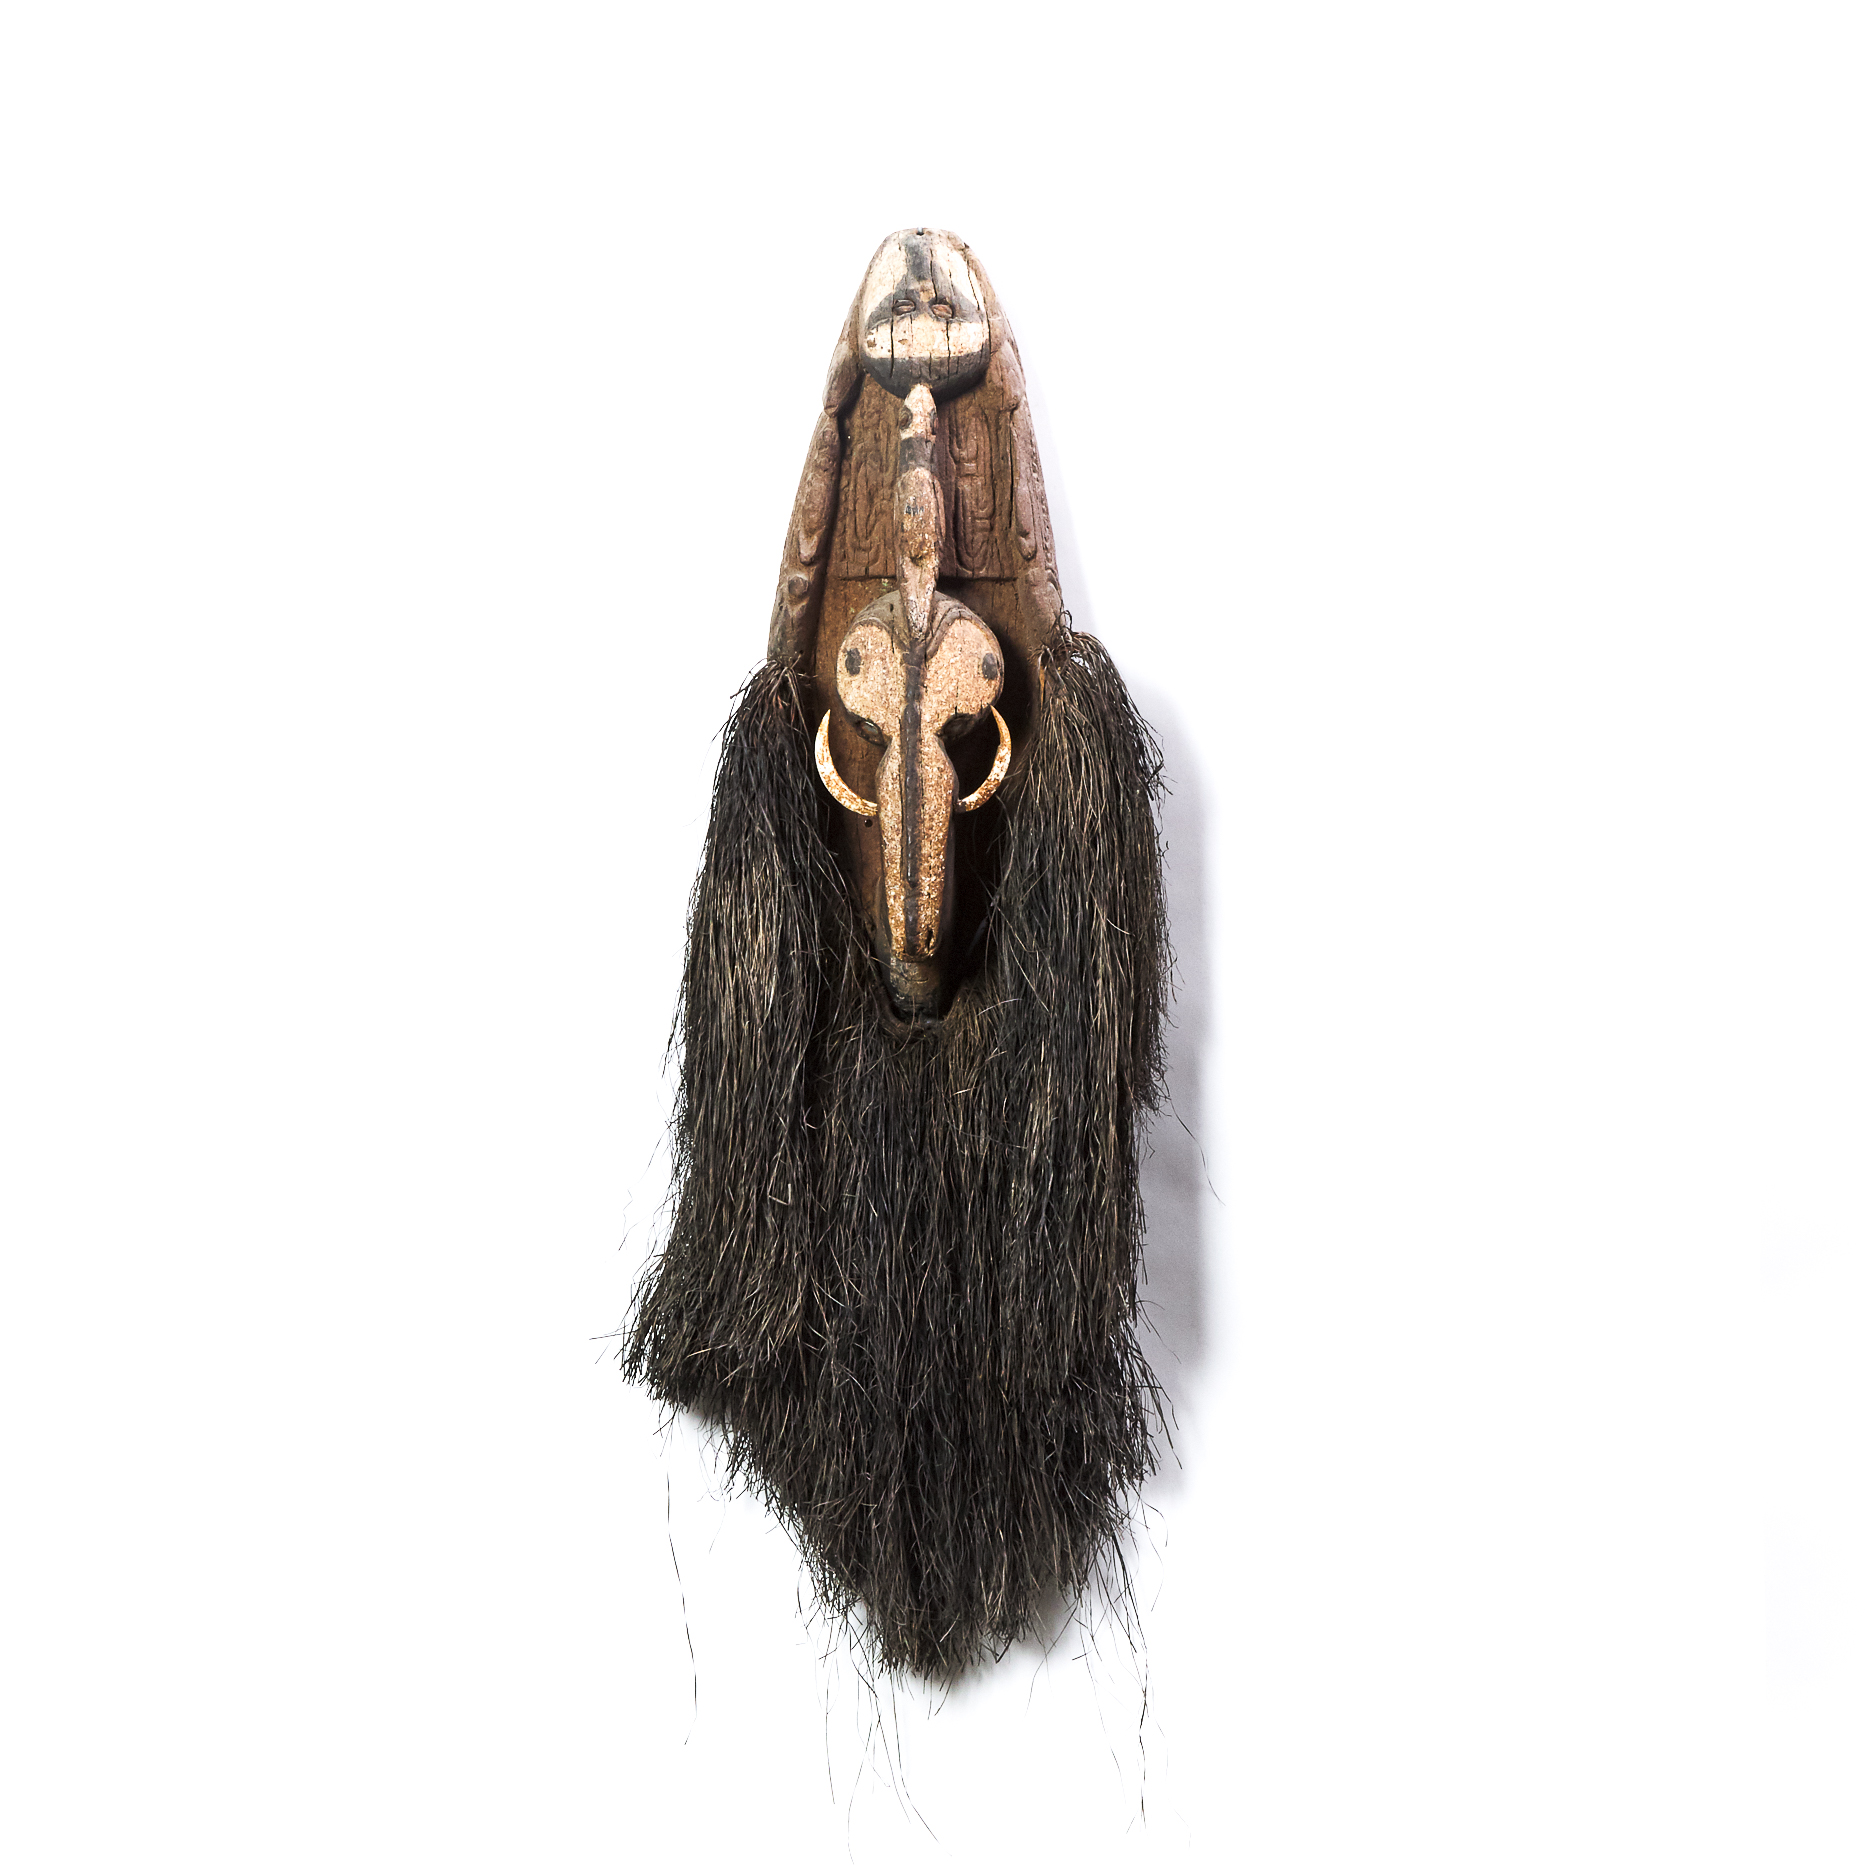 Zoomorphic Mask, possibly Sepik River, Papua New Guinea, early to mid 20th century